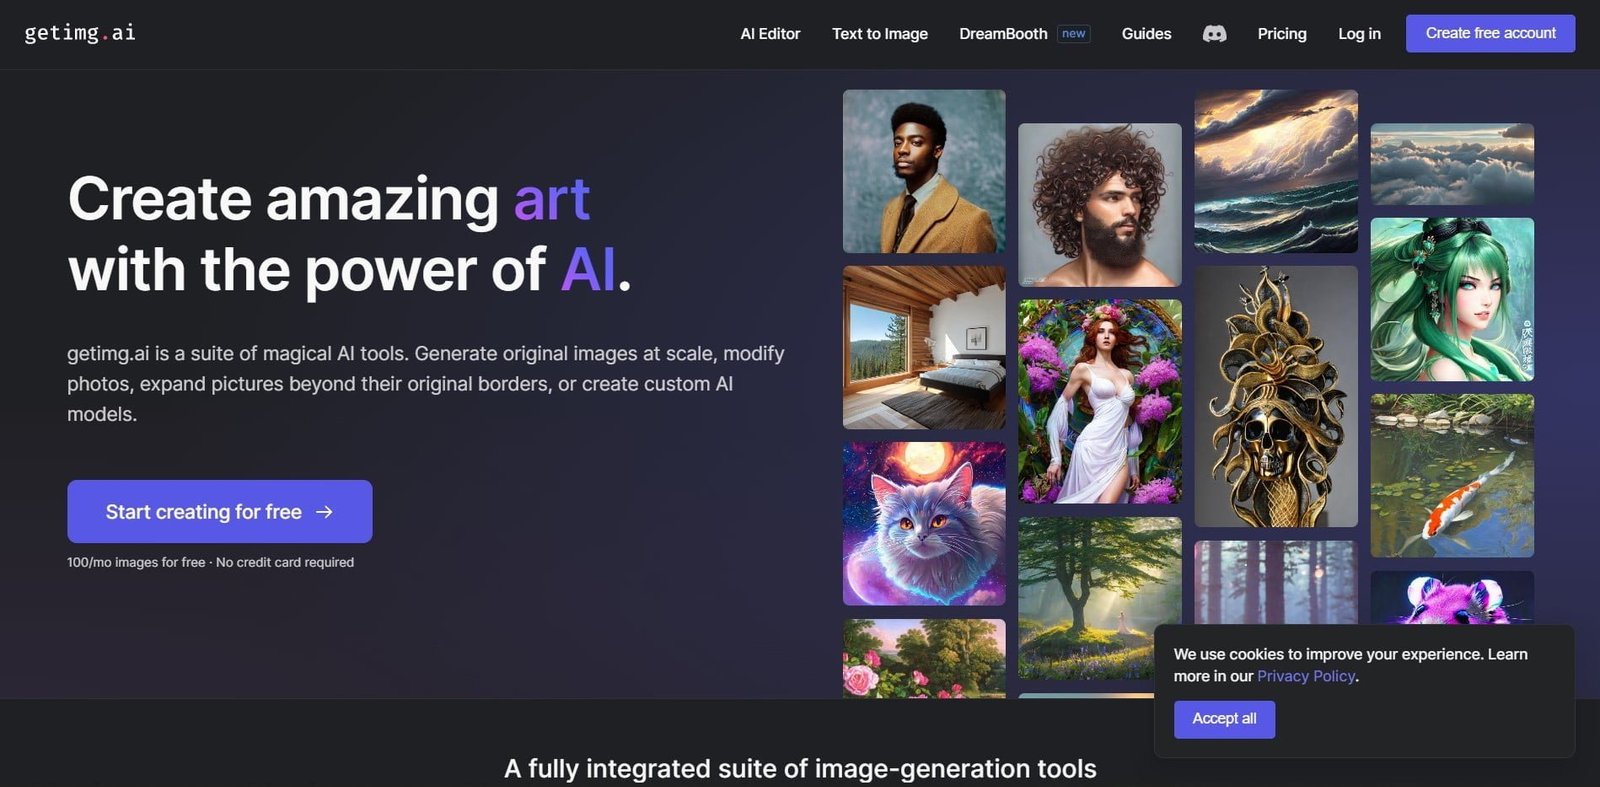 Getimg.ai is an AI image generator tools that allows users to create original pictures